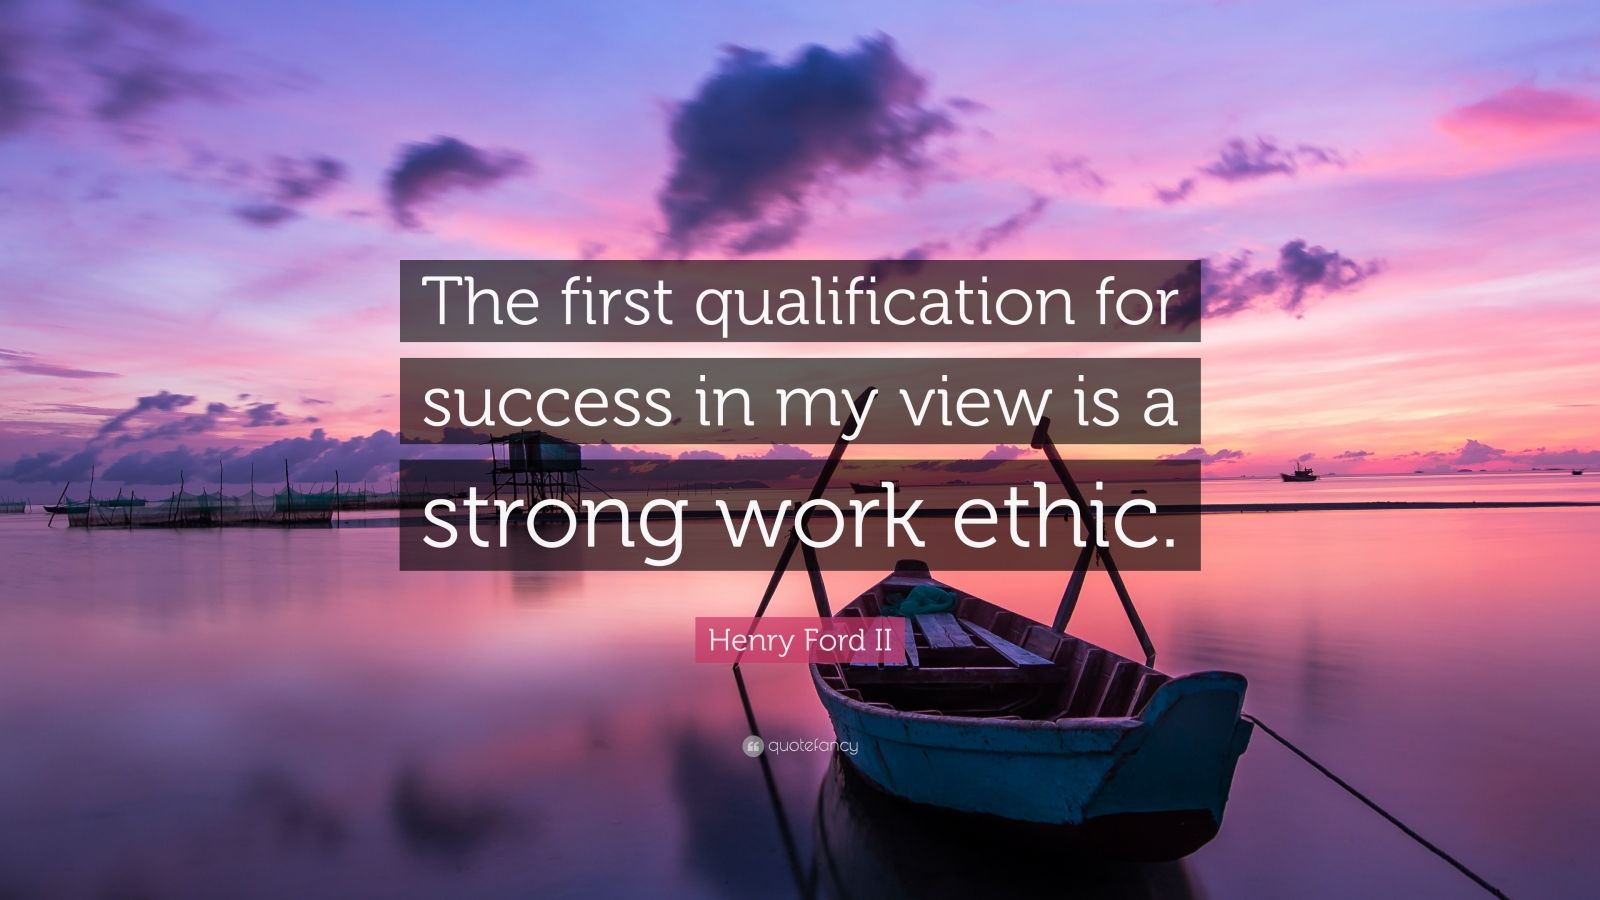 Henry Ford II Quote: “The first qualification for success in my view is